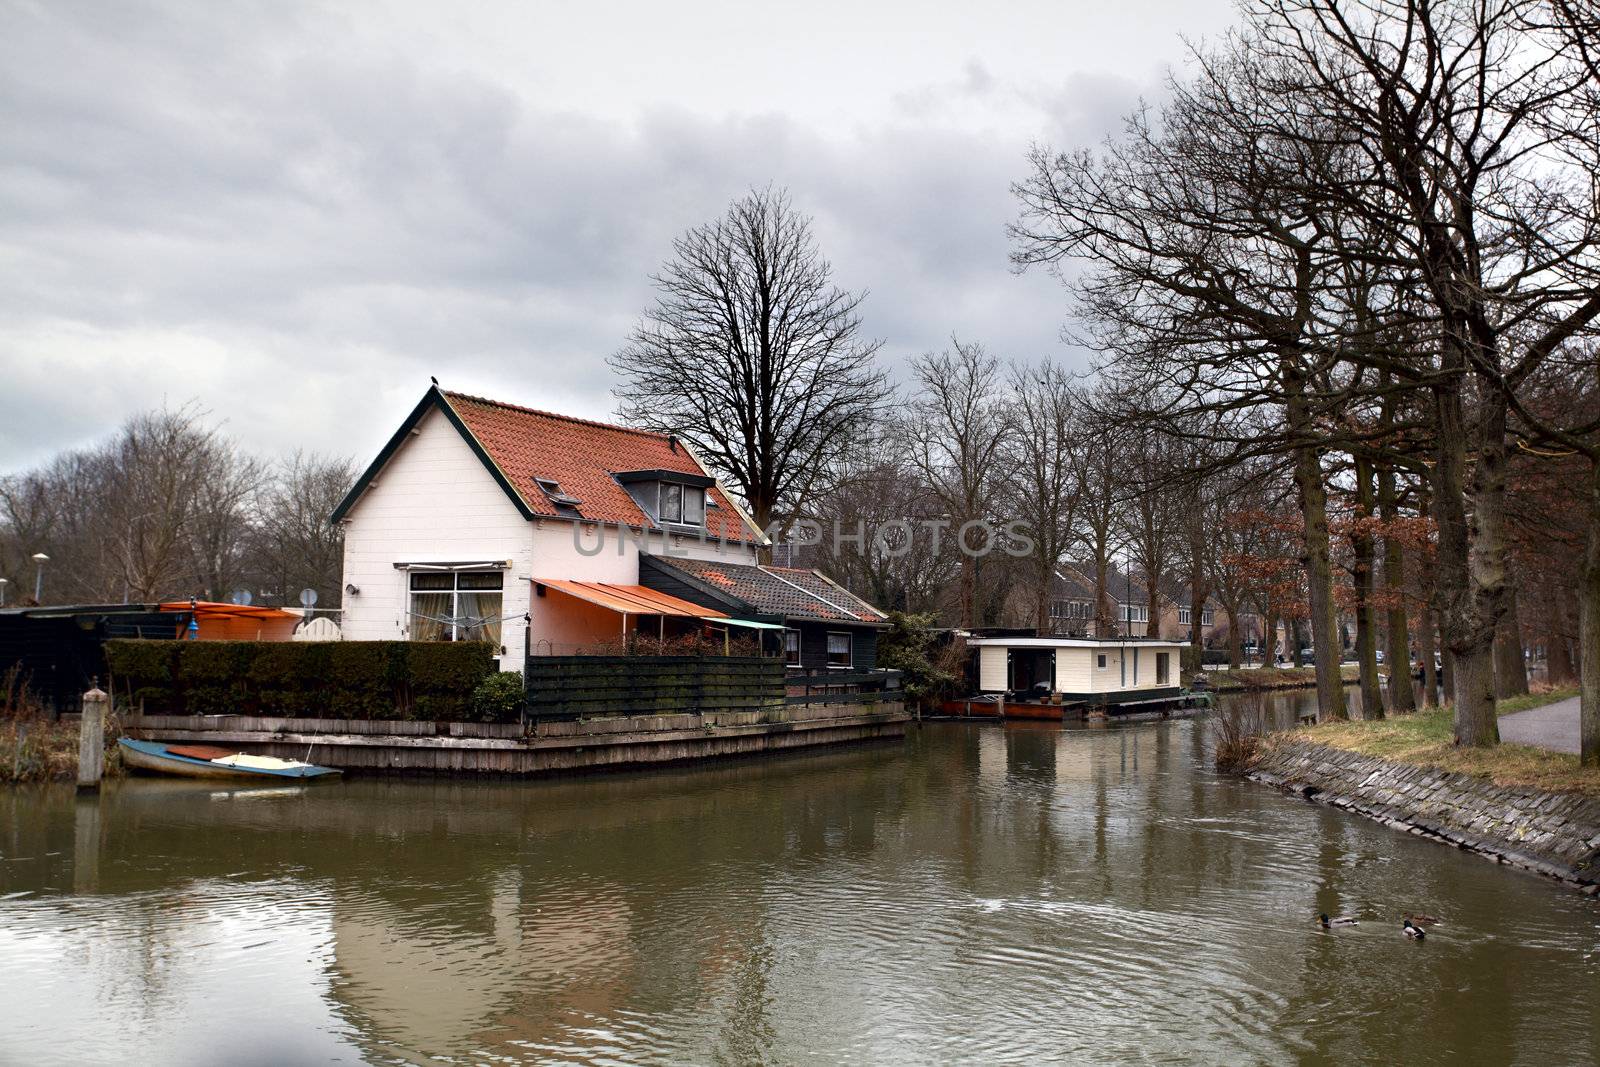 houses on the water in small Dutch town